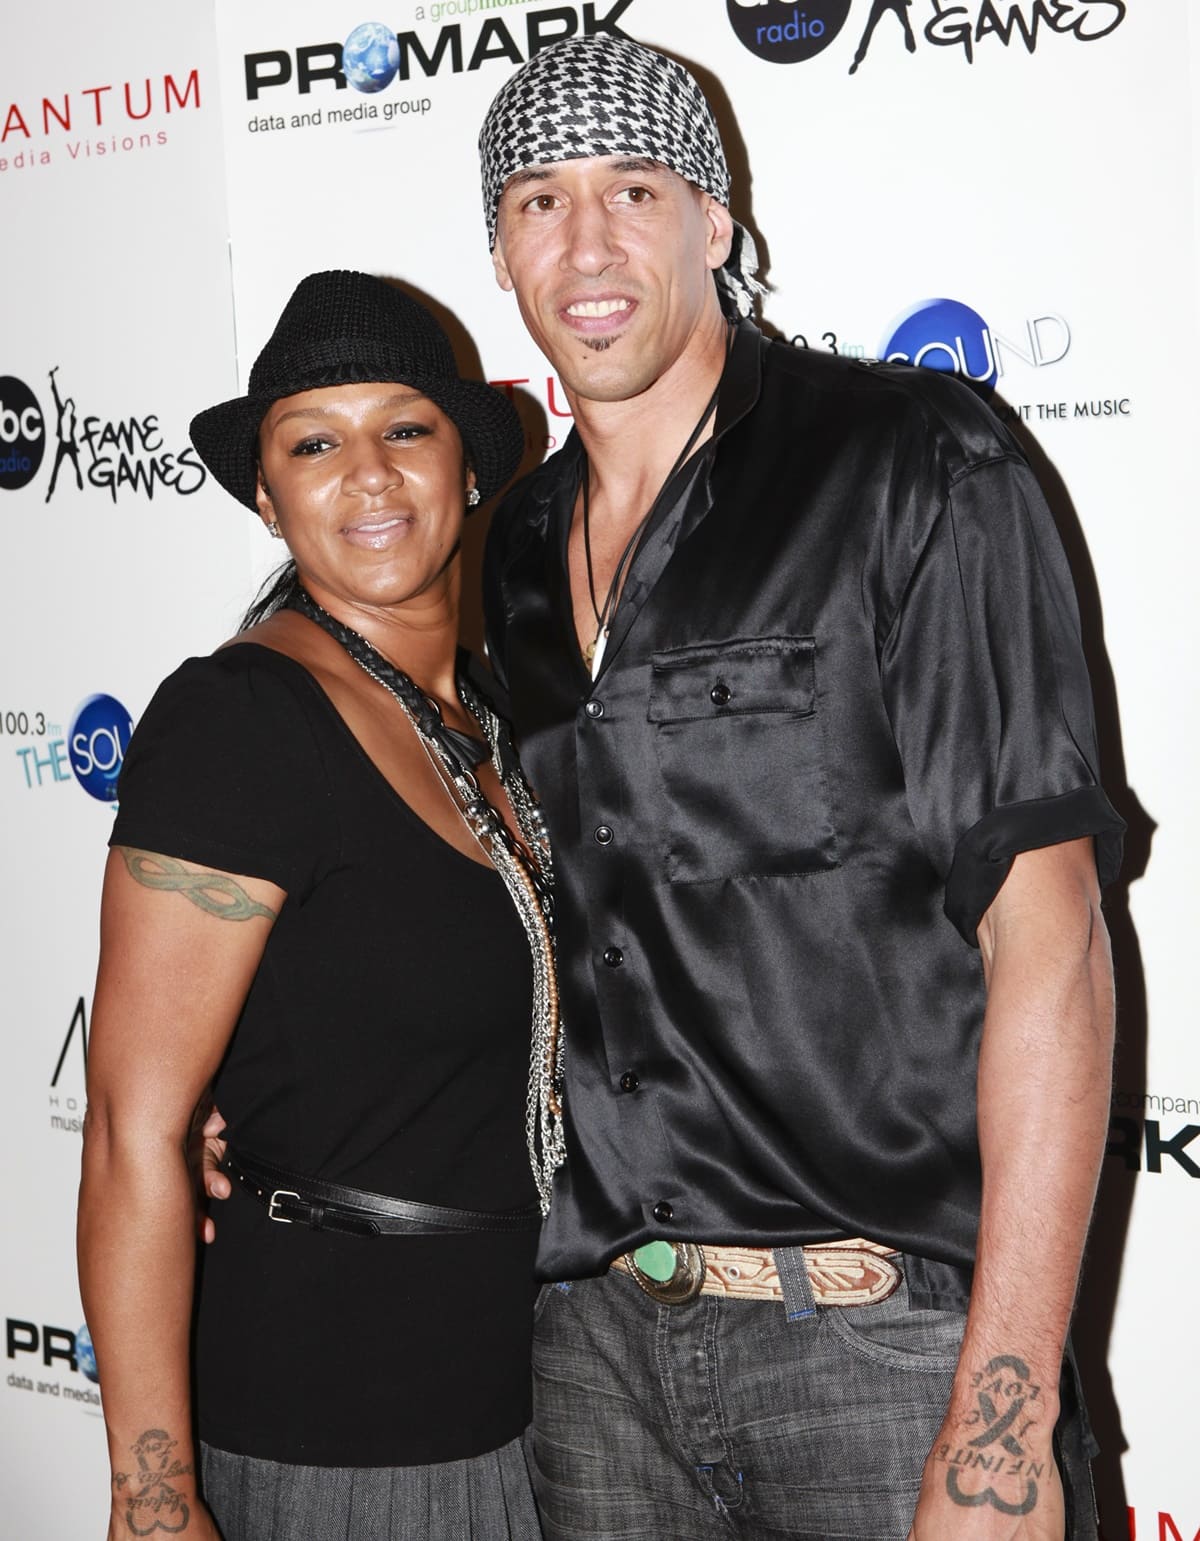 Basketball Wives star Jackie Christie has been married to former NBA player and current Sacramento Kings assistant coach Doug Christie since 1996